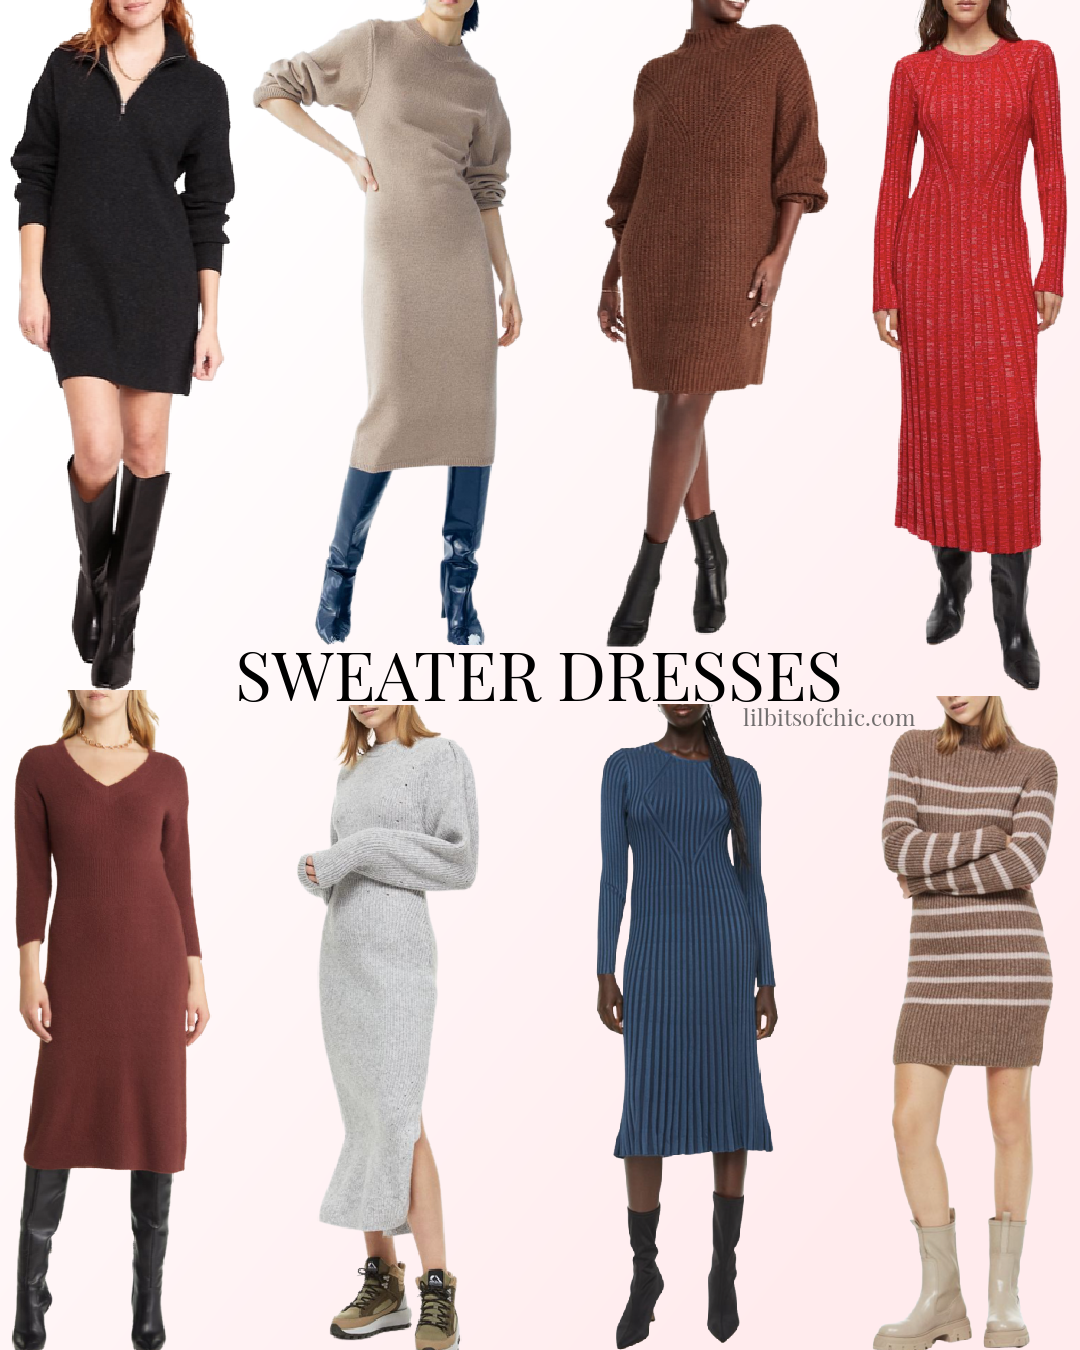 affordable sweater dresses, shoppable sweater dresses, sweater dress roundup